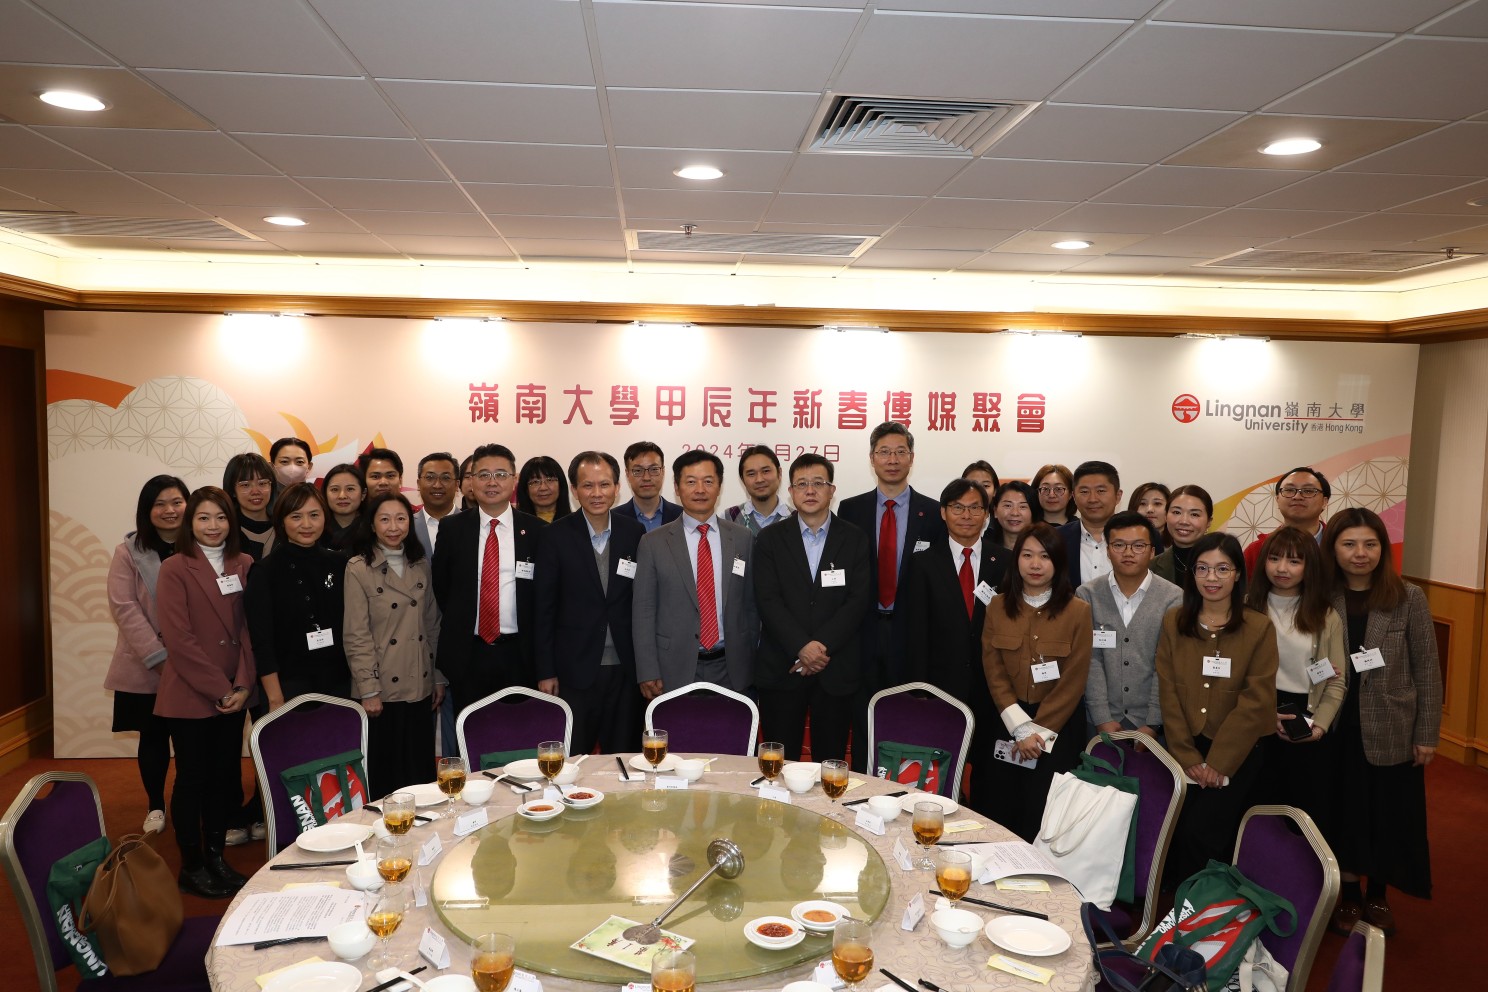 Lingnan University holds a Chinese New Year media reception today on campus, where senior management members share the latest developments of the University with the media.